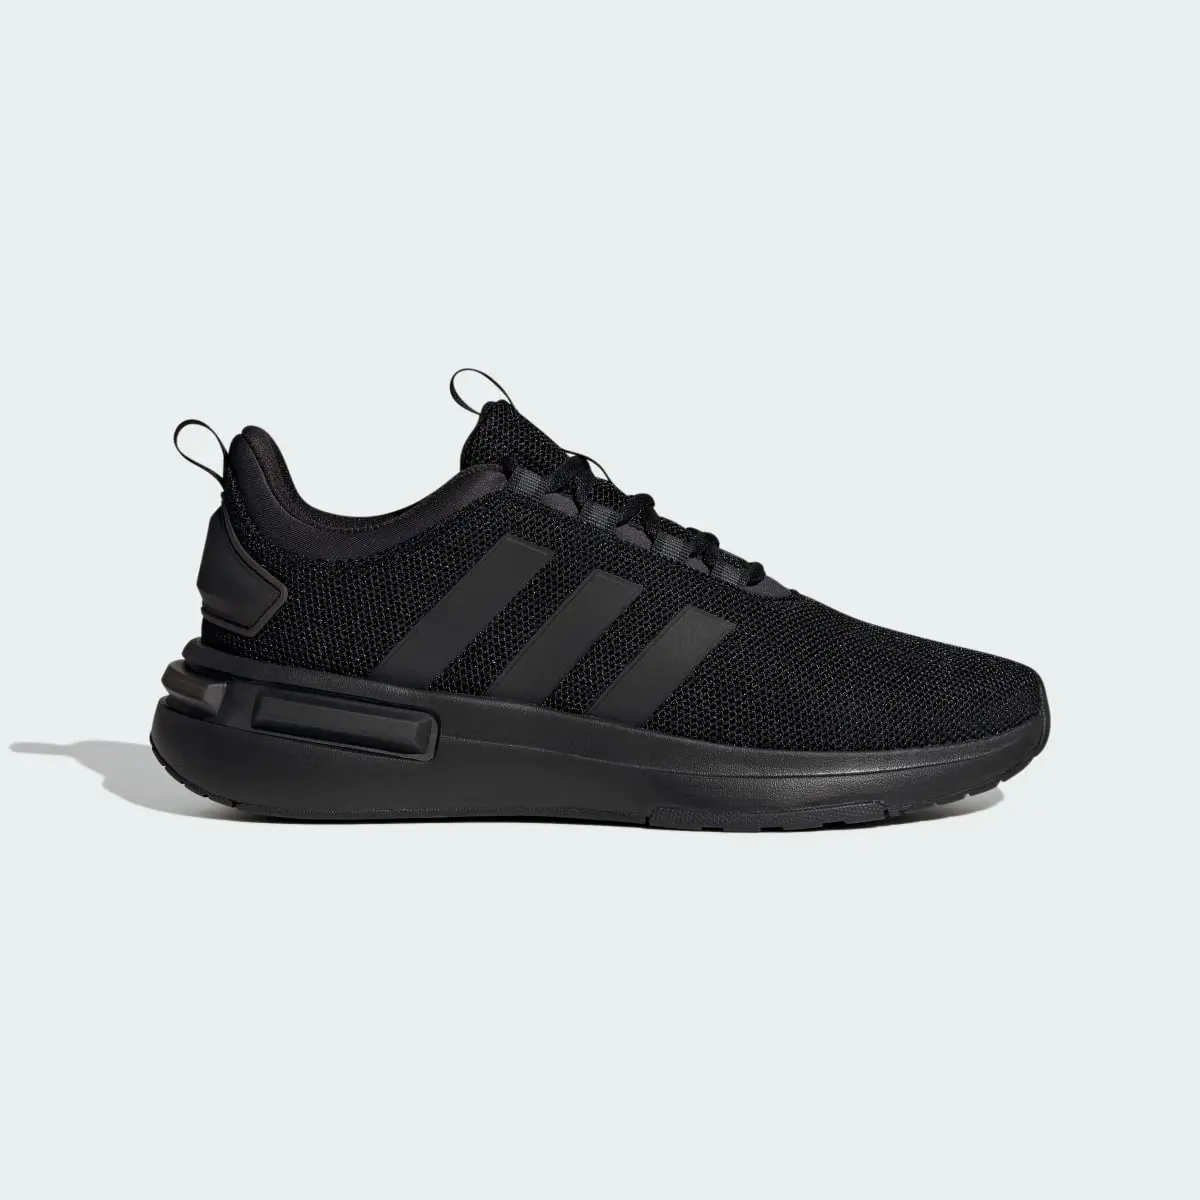 Adidas Racer TR23 Shoes. 2